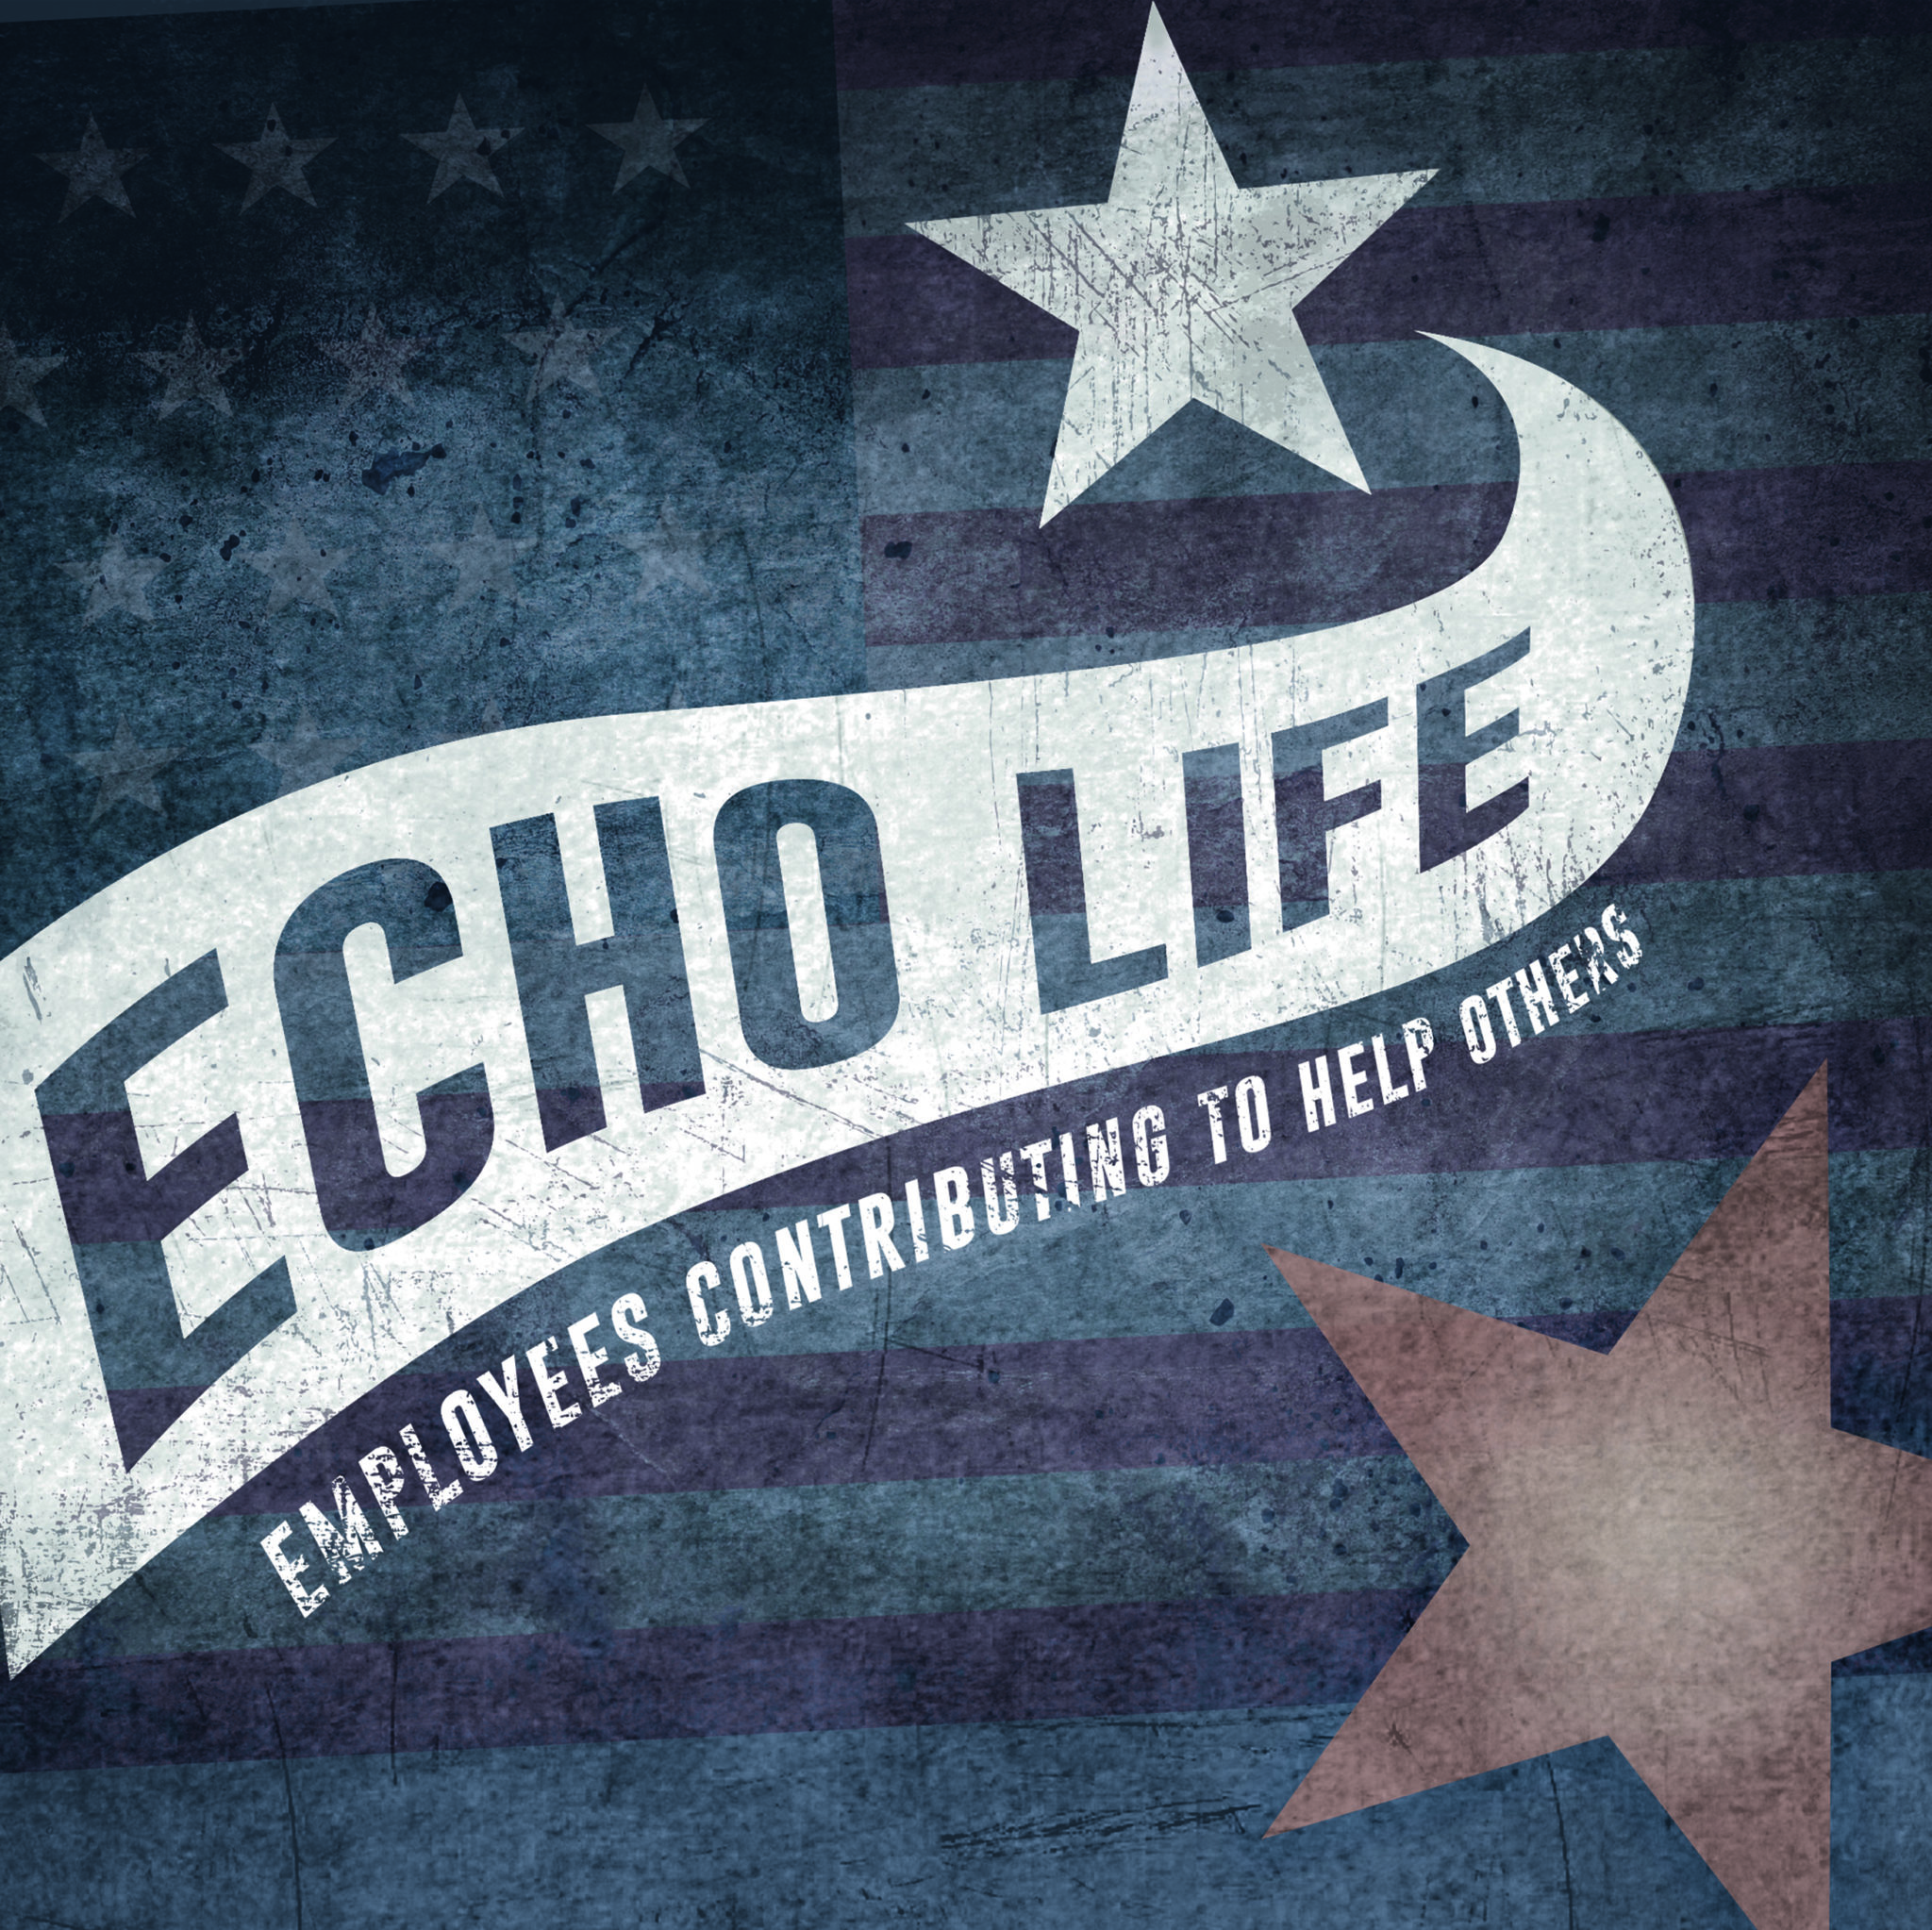 ECHO Life - Employees Contributing to Help Others